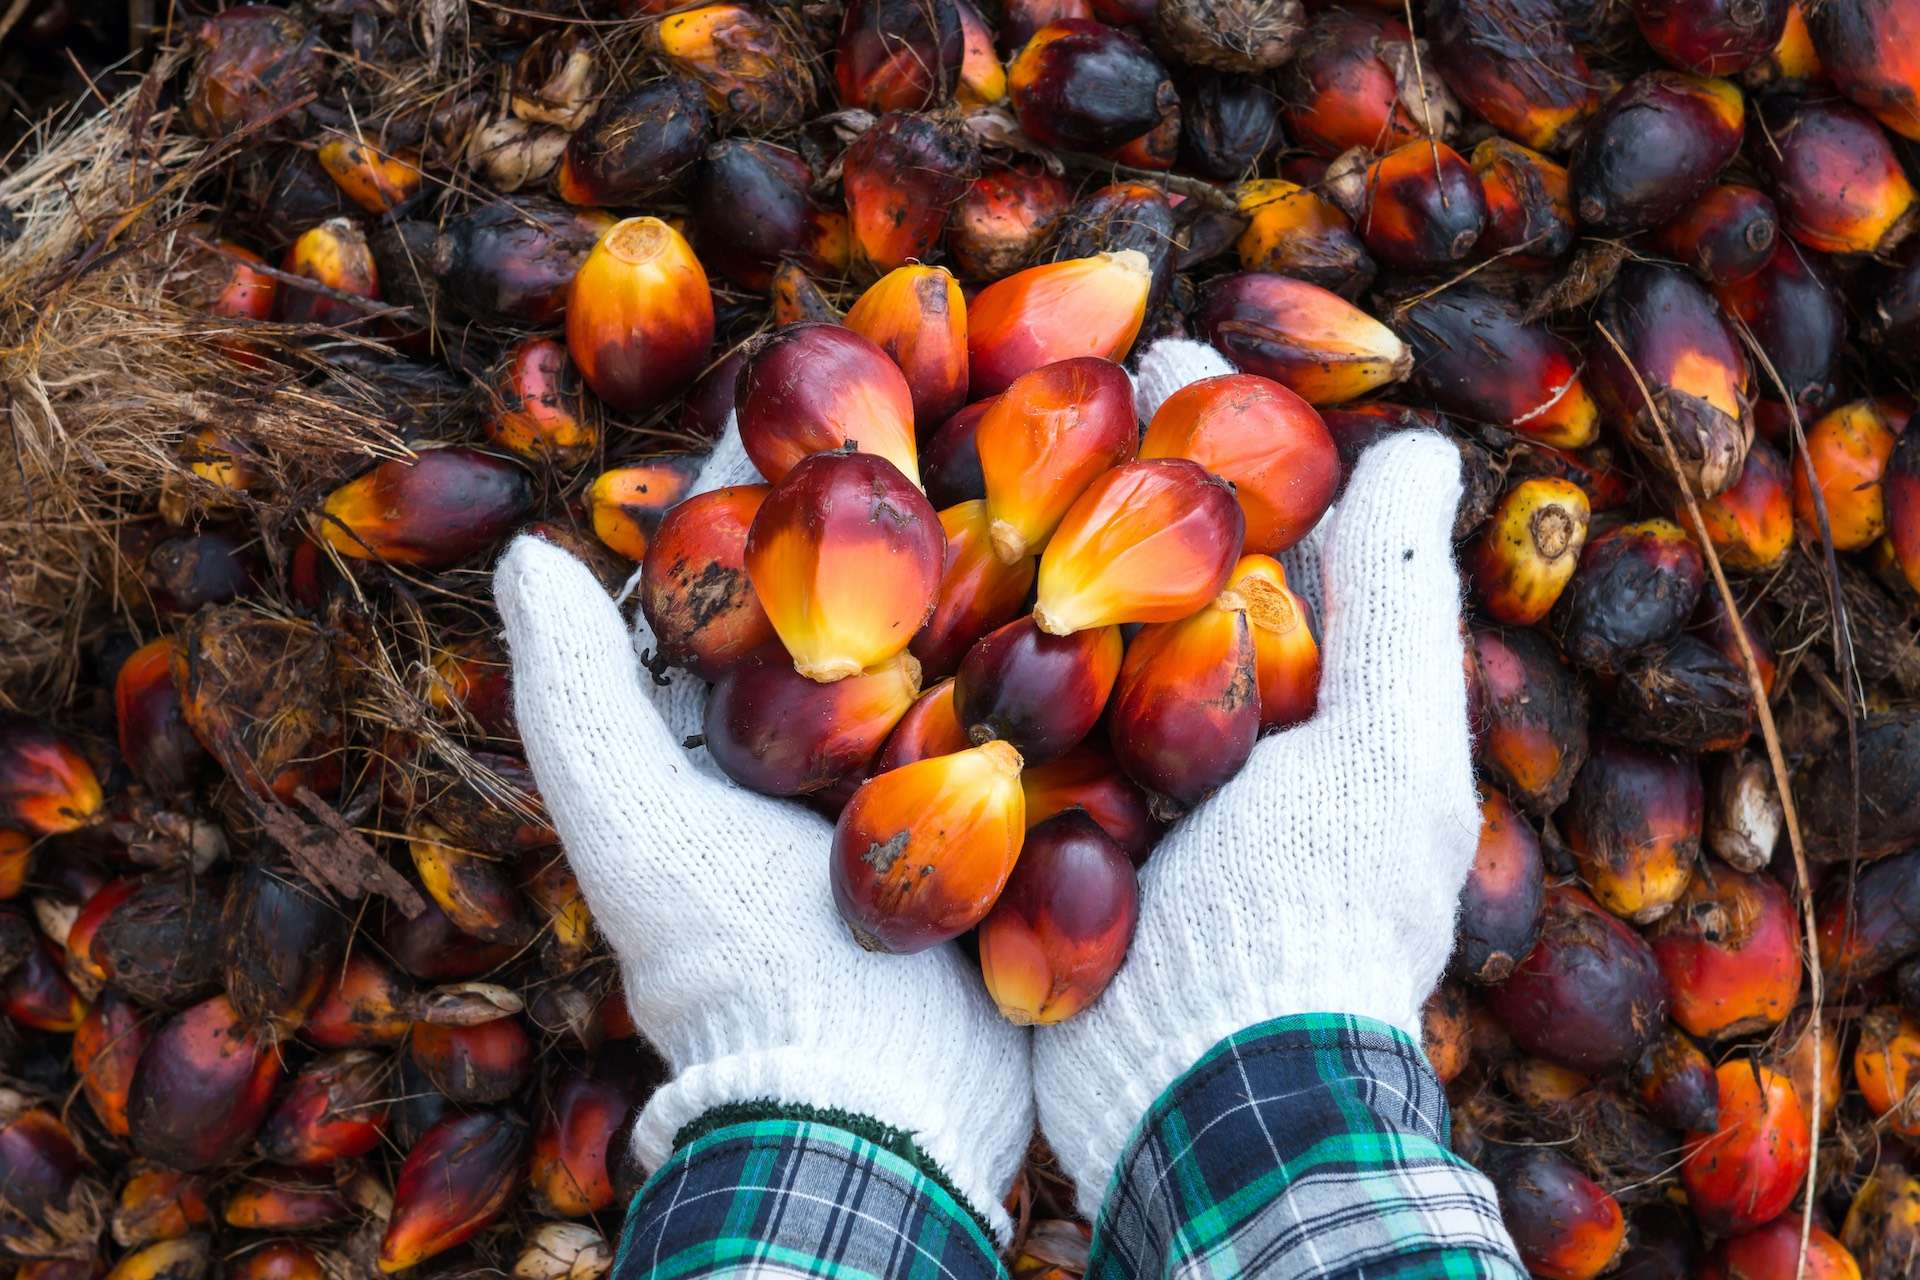 Palm oil seeds on male's hand